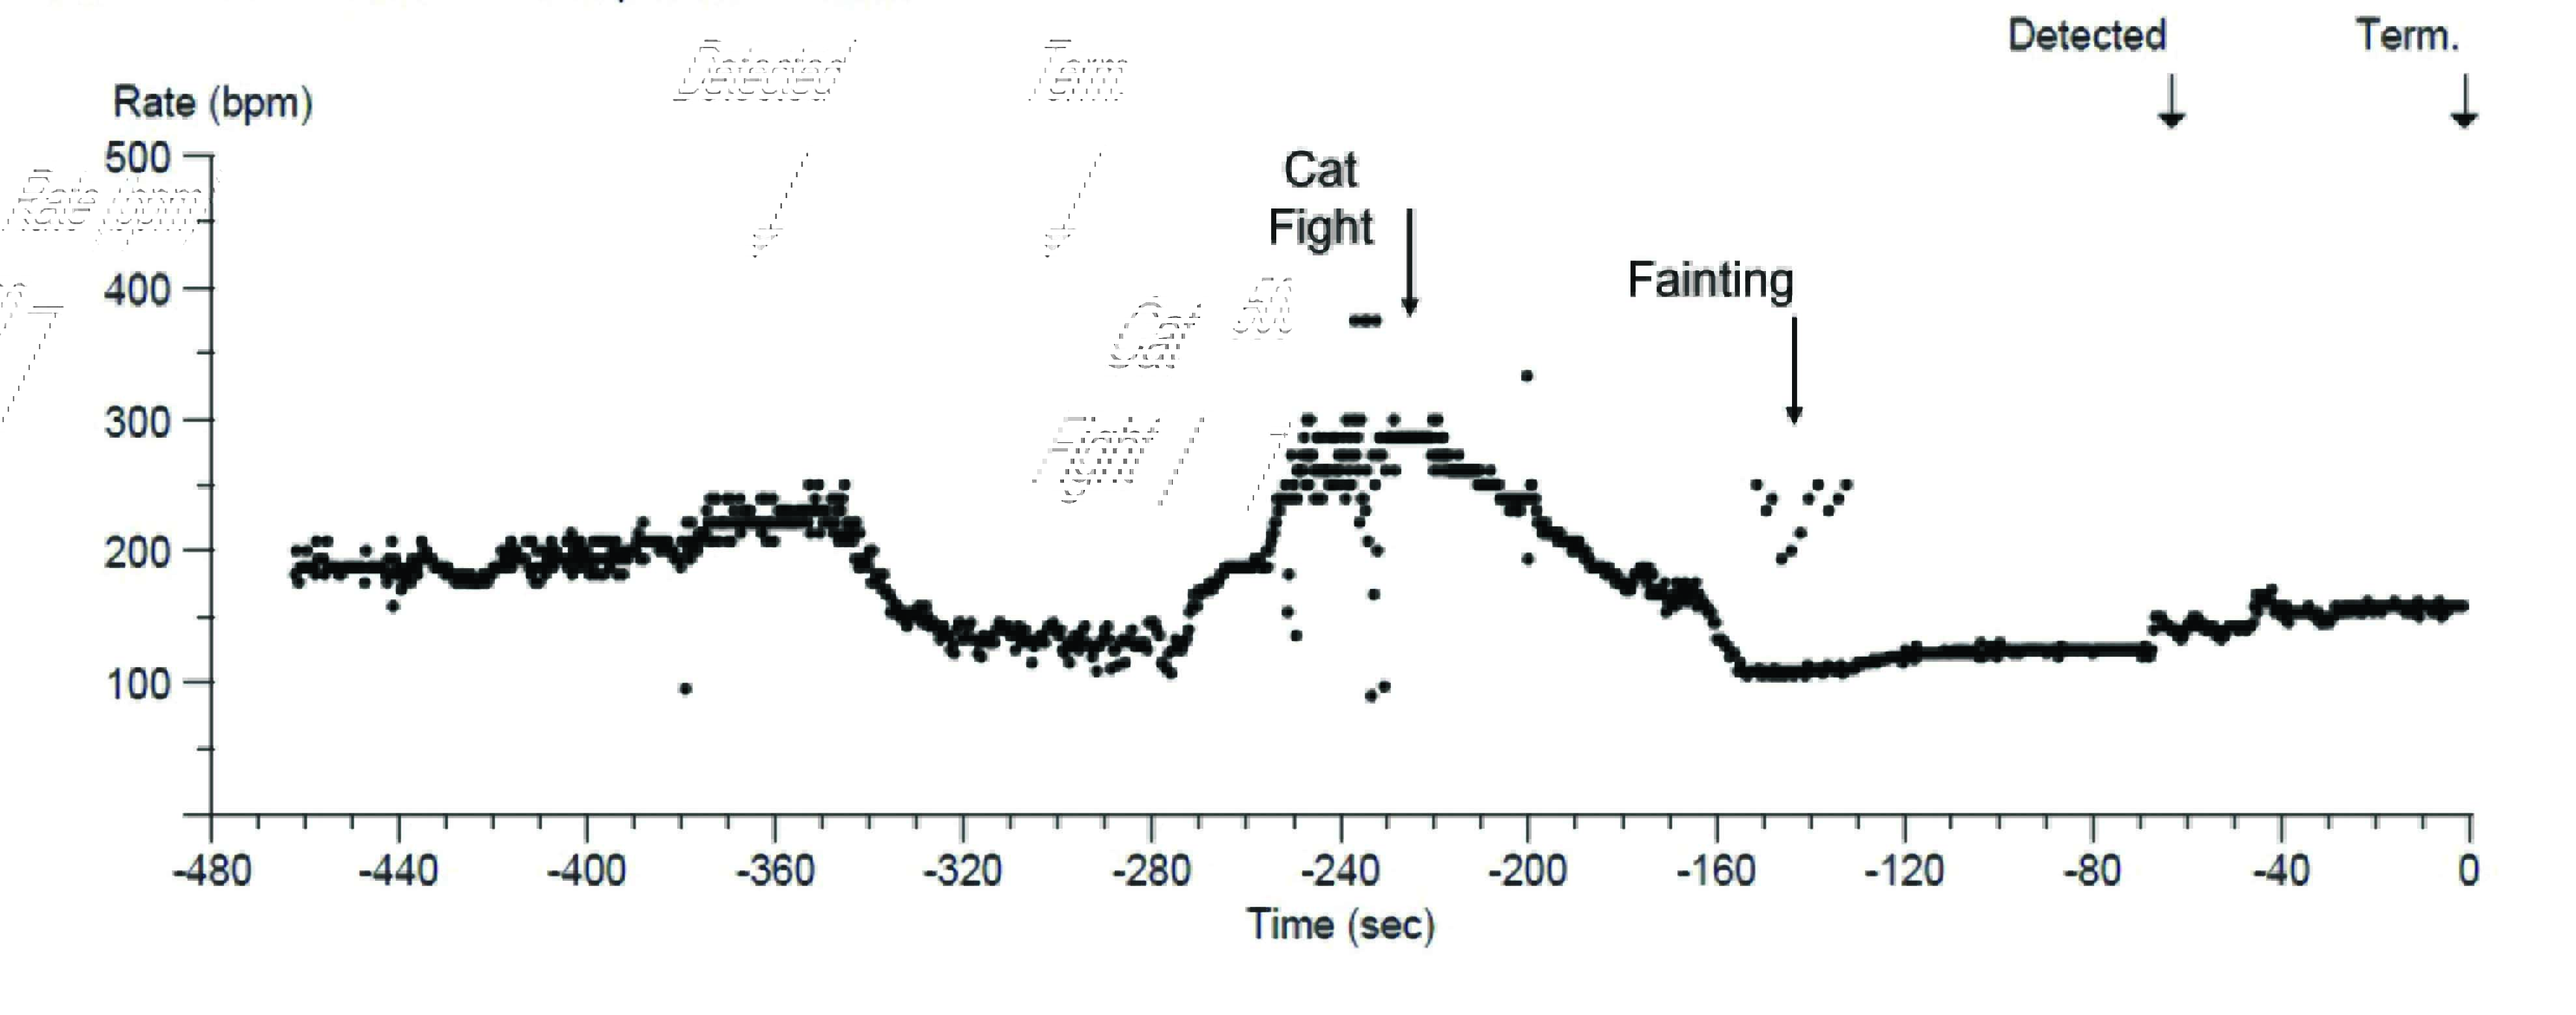 ILR interrogation following another fainting episode showed a period of tachycardia during a cat fight